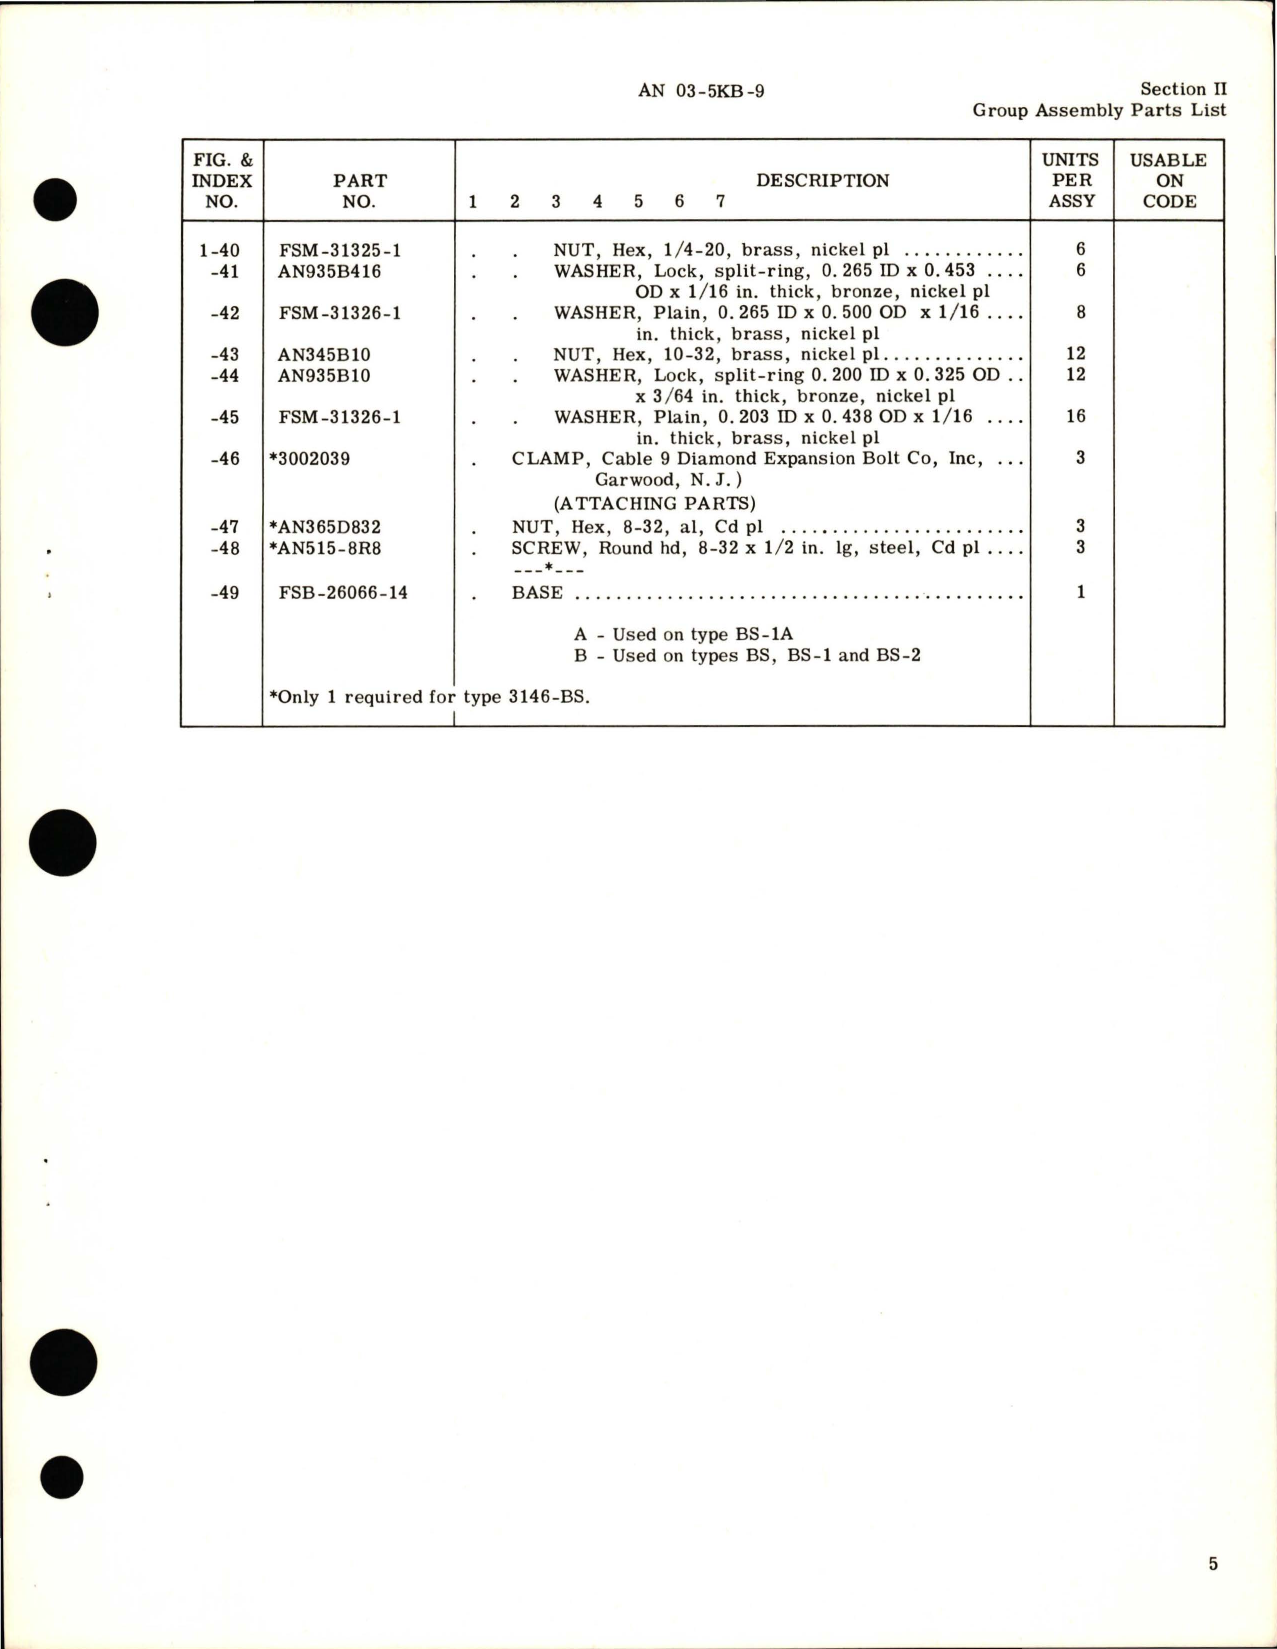 Sample page 5 from AirCorps Library document: Illustrated Parts Breakdown for Transformer Rectifier - Type A-2